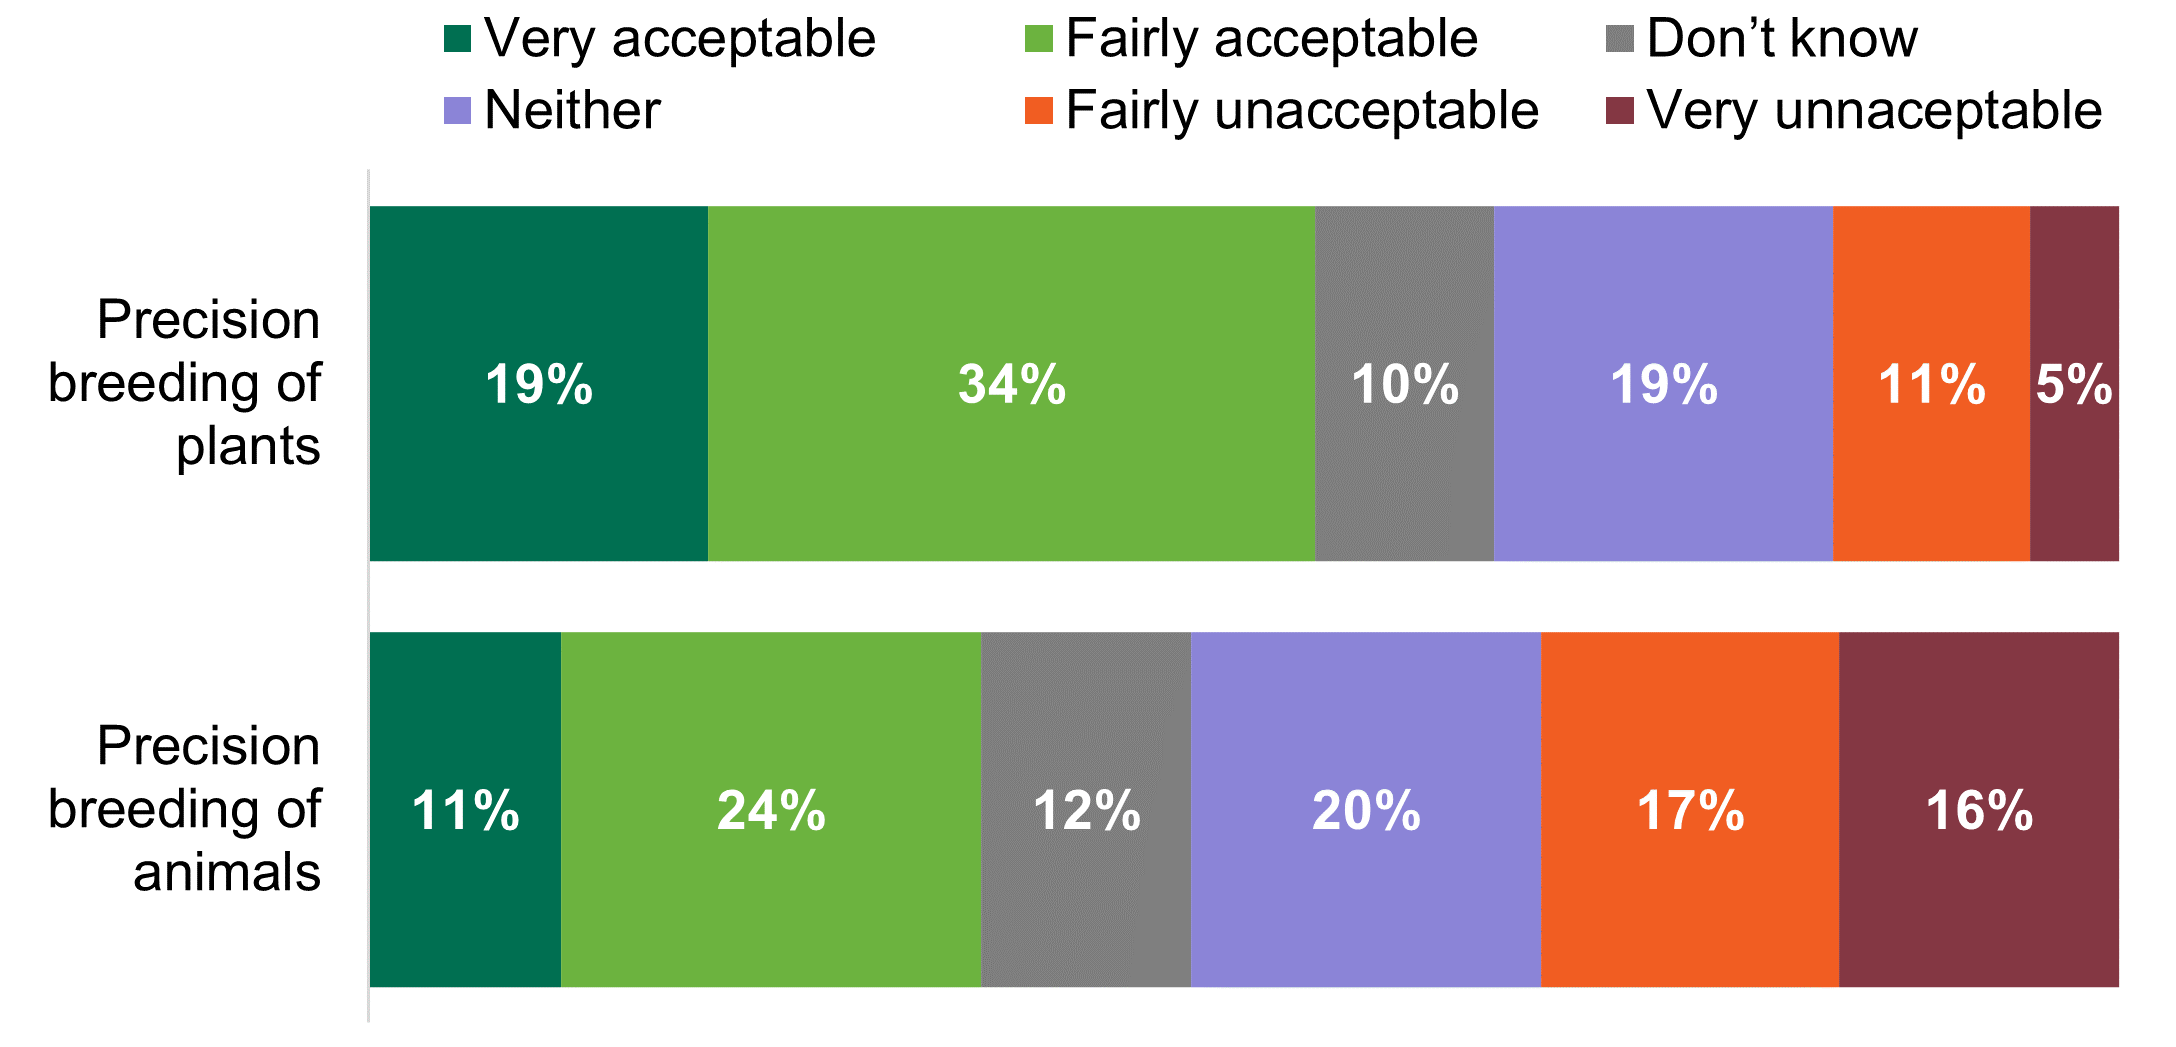 Graph to show level of acceptability of precision breeding in plants and animals